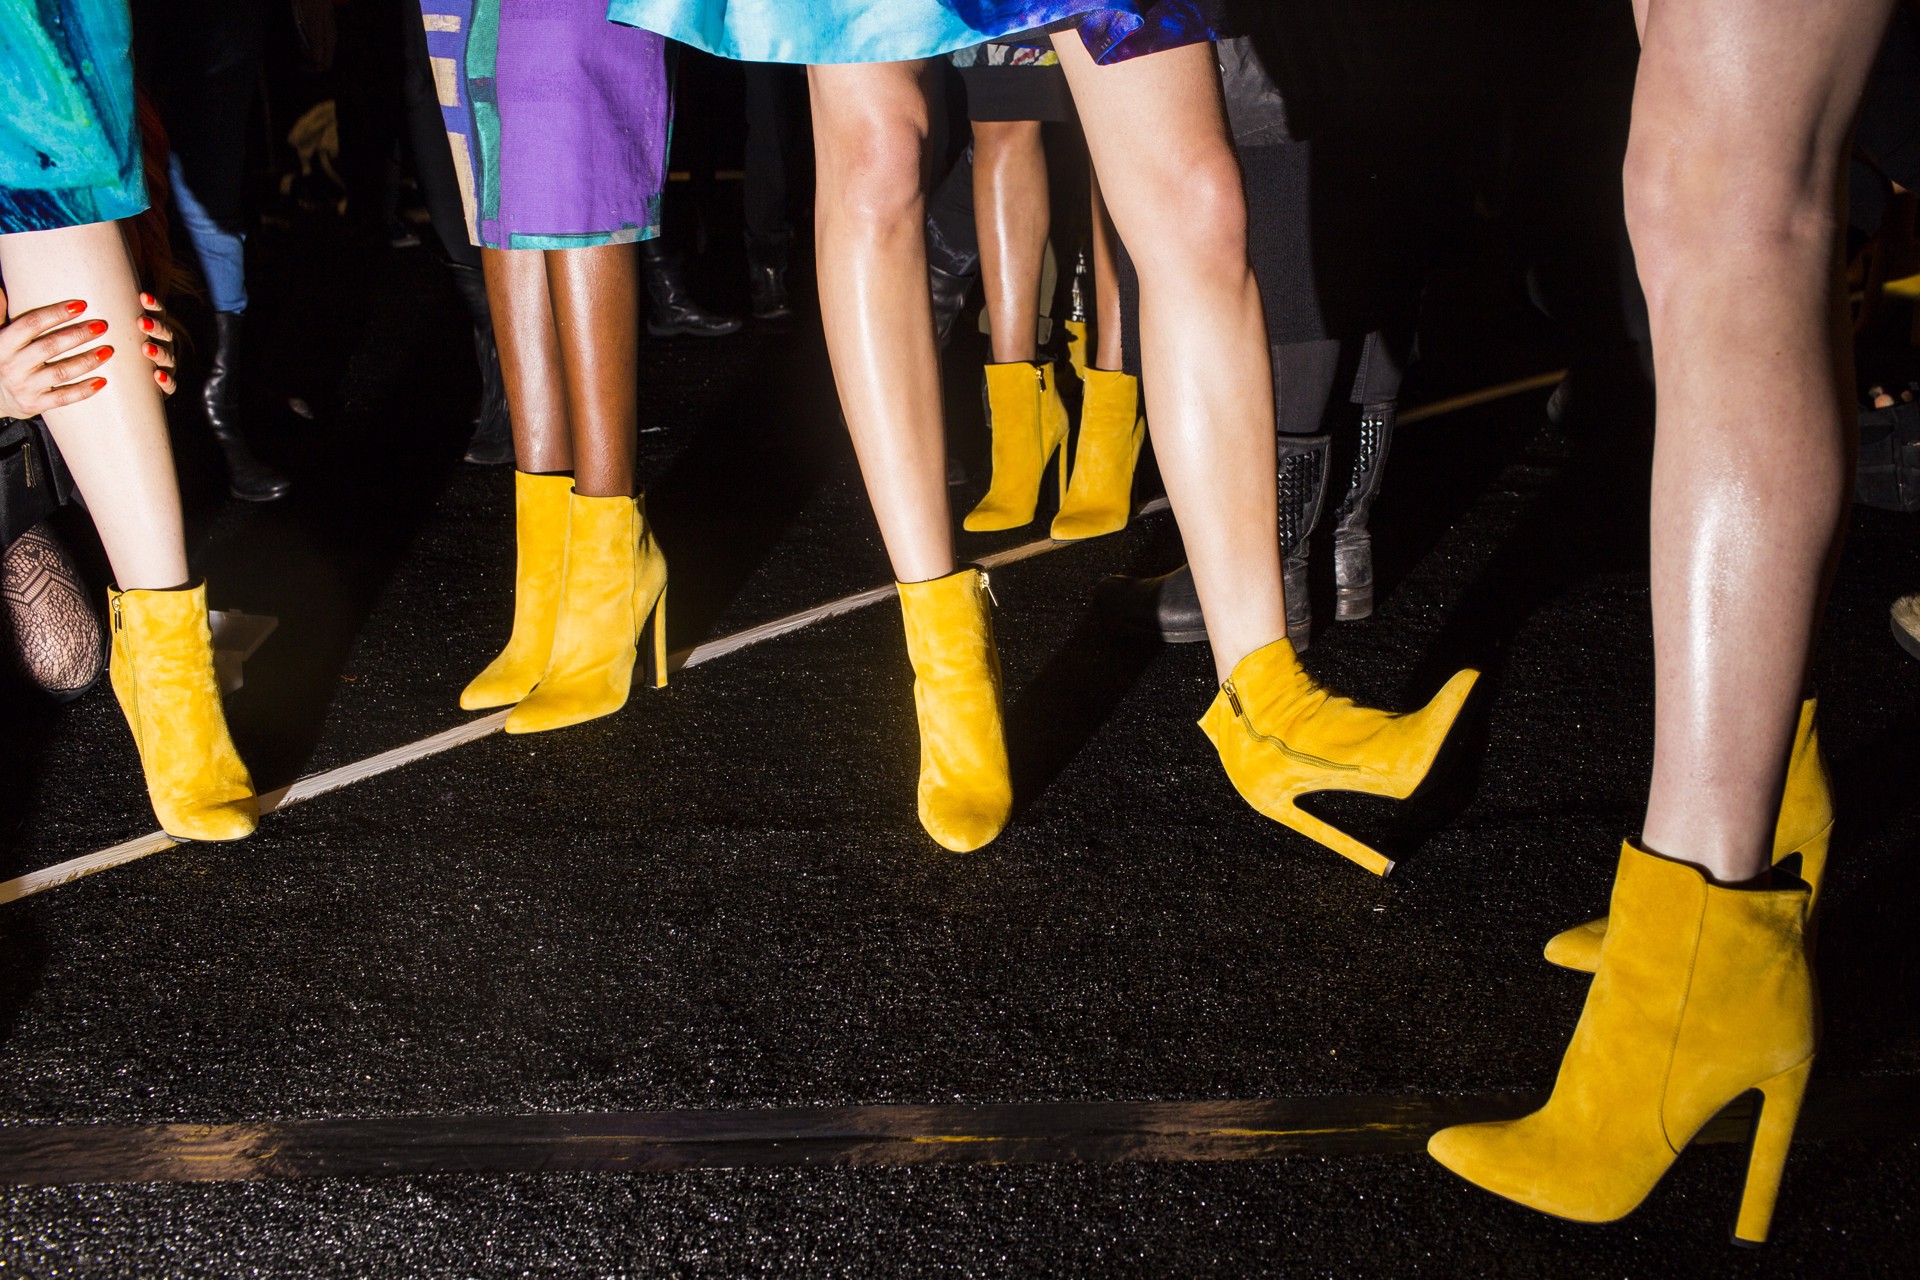 Backstage at Desigual with Yellow Boots, Out of Fashion series, NYC) by Landon Nordeman